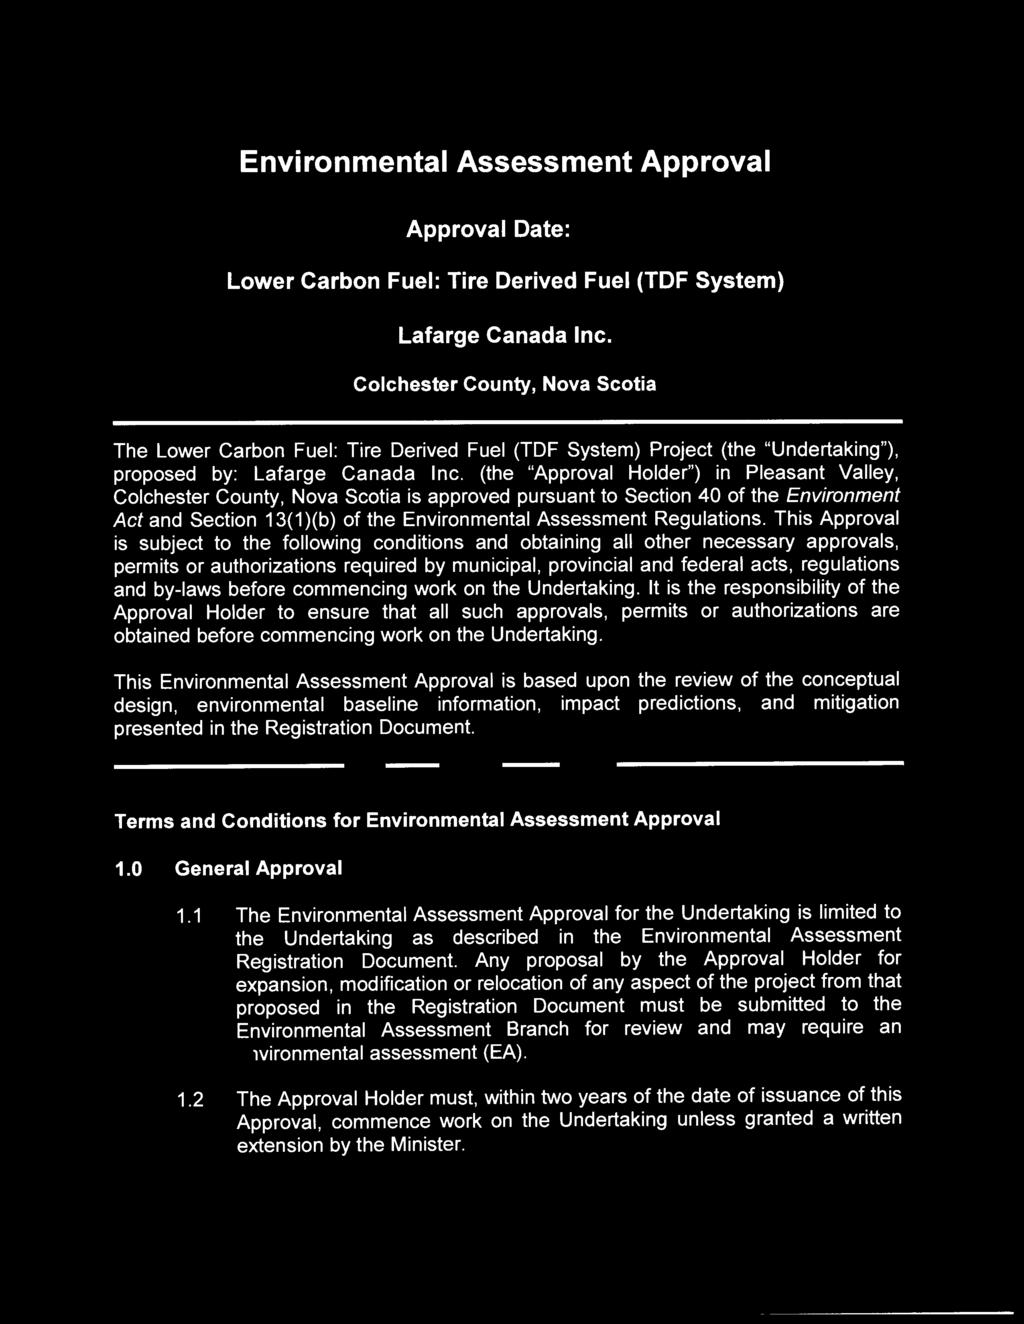 Environmental Assessment Approval Approval Date: JUL O 6 2017 Lower Carbon Fuel: Tire Derived Fuel (TDF System) Lafarge Canada Inc.